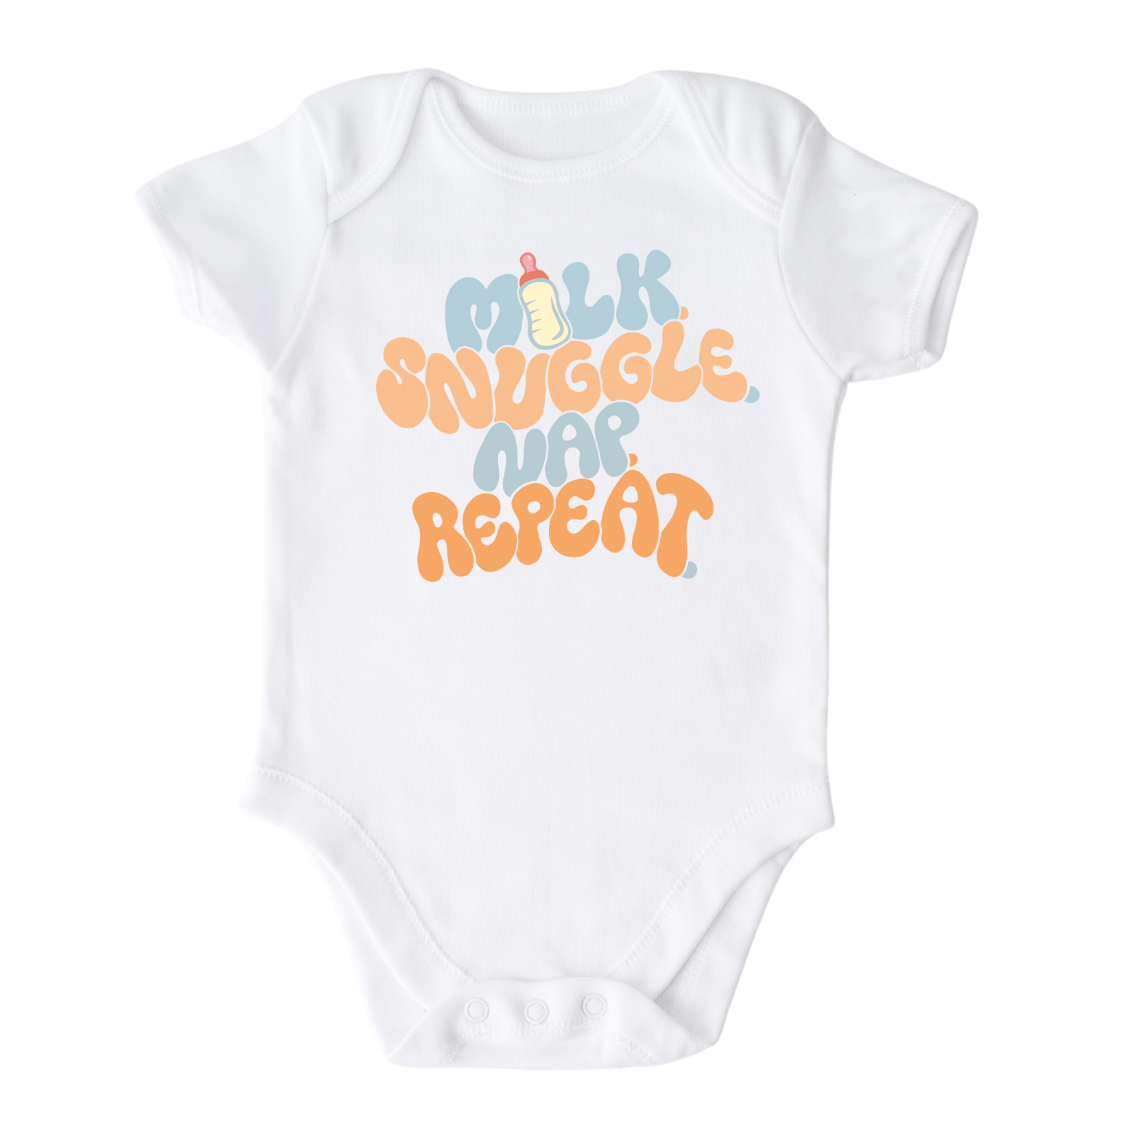 White Baby Bodysuit with a fun printed graphic and the text 'Milk Snuggle Nap Repeat.' This playful and cute design captures the essence of cozy and comforting moments. 